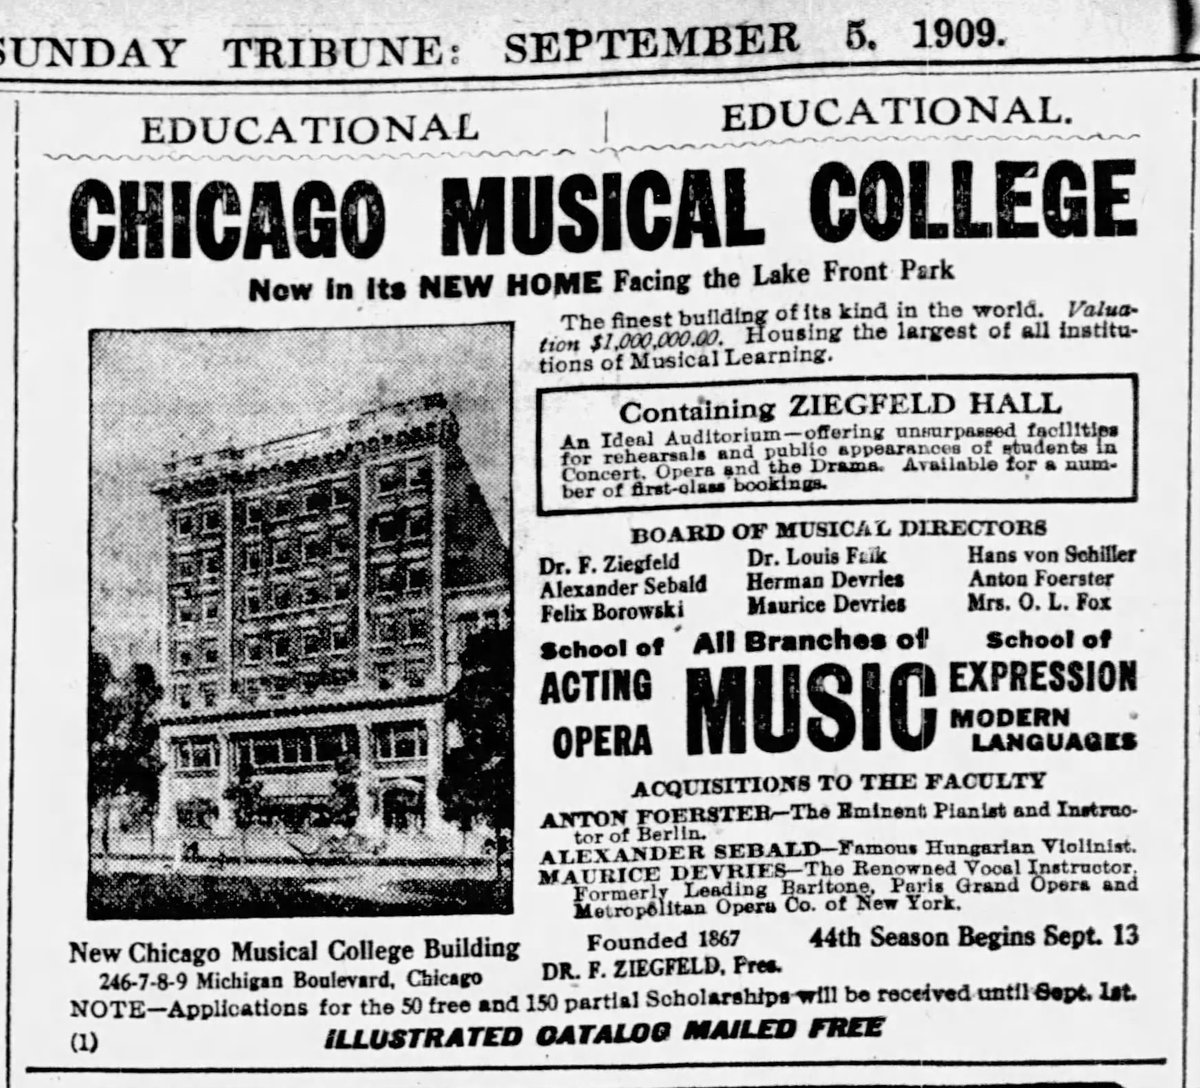 Florence Ziegfeld Sr. founded the Chicago Musical College in 1867. The growing school moved into this C.A. Eckstorm-designed building when it was completed in 1908. It wouldn’t remain here long - within a decade it was converted into a movie theater.3/11